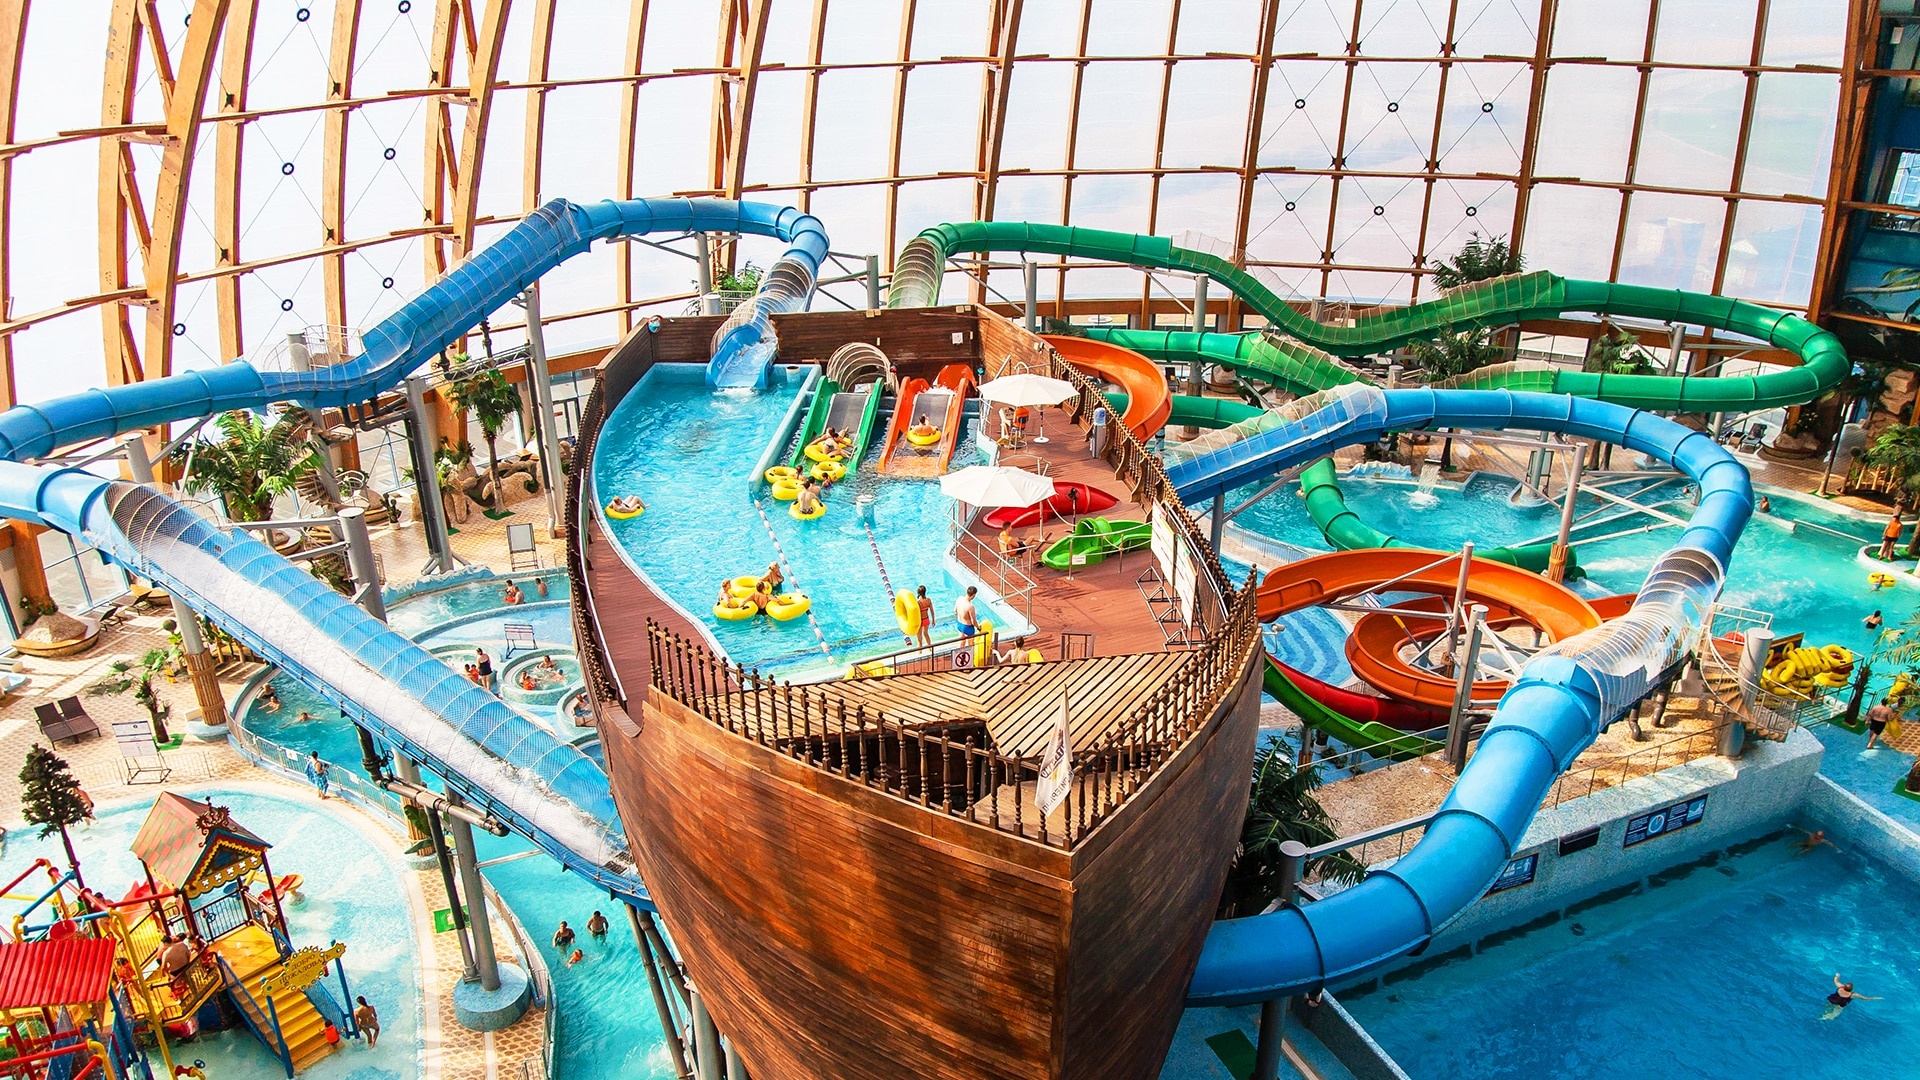 Waterpark: Piterland, A place with slides, a lazy river, and a wave pool. 1920x1080 Full HD Background.